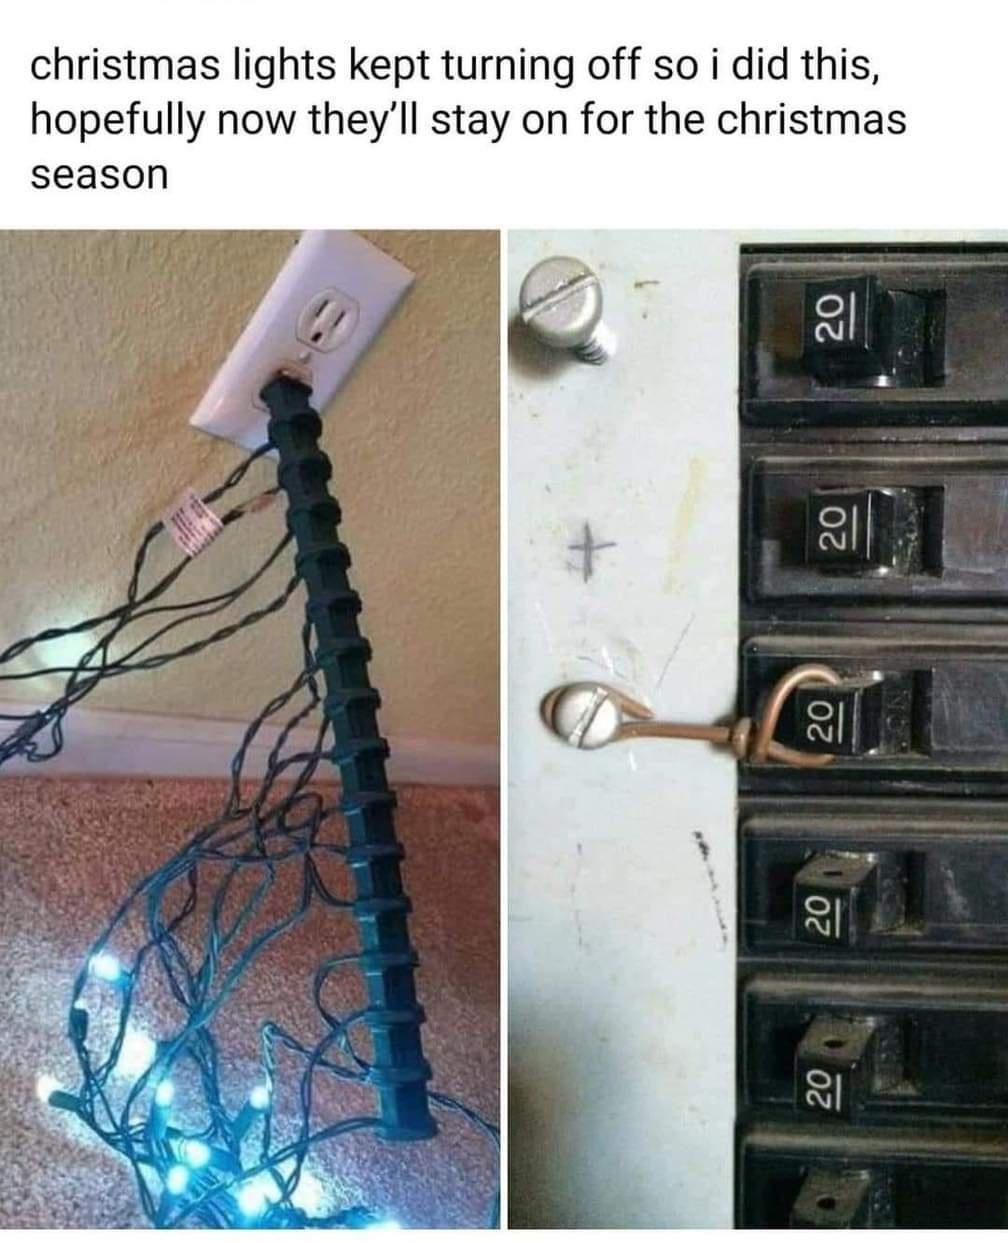 funny circuit breaker - christmas lights kept turning off so i did this, hopefully now they'll stay on for the christmas season 20 20 20 20 20